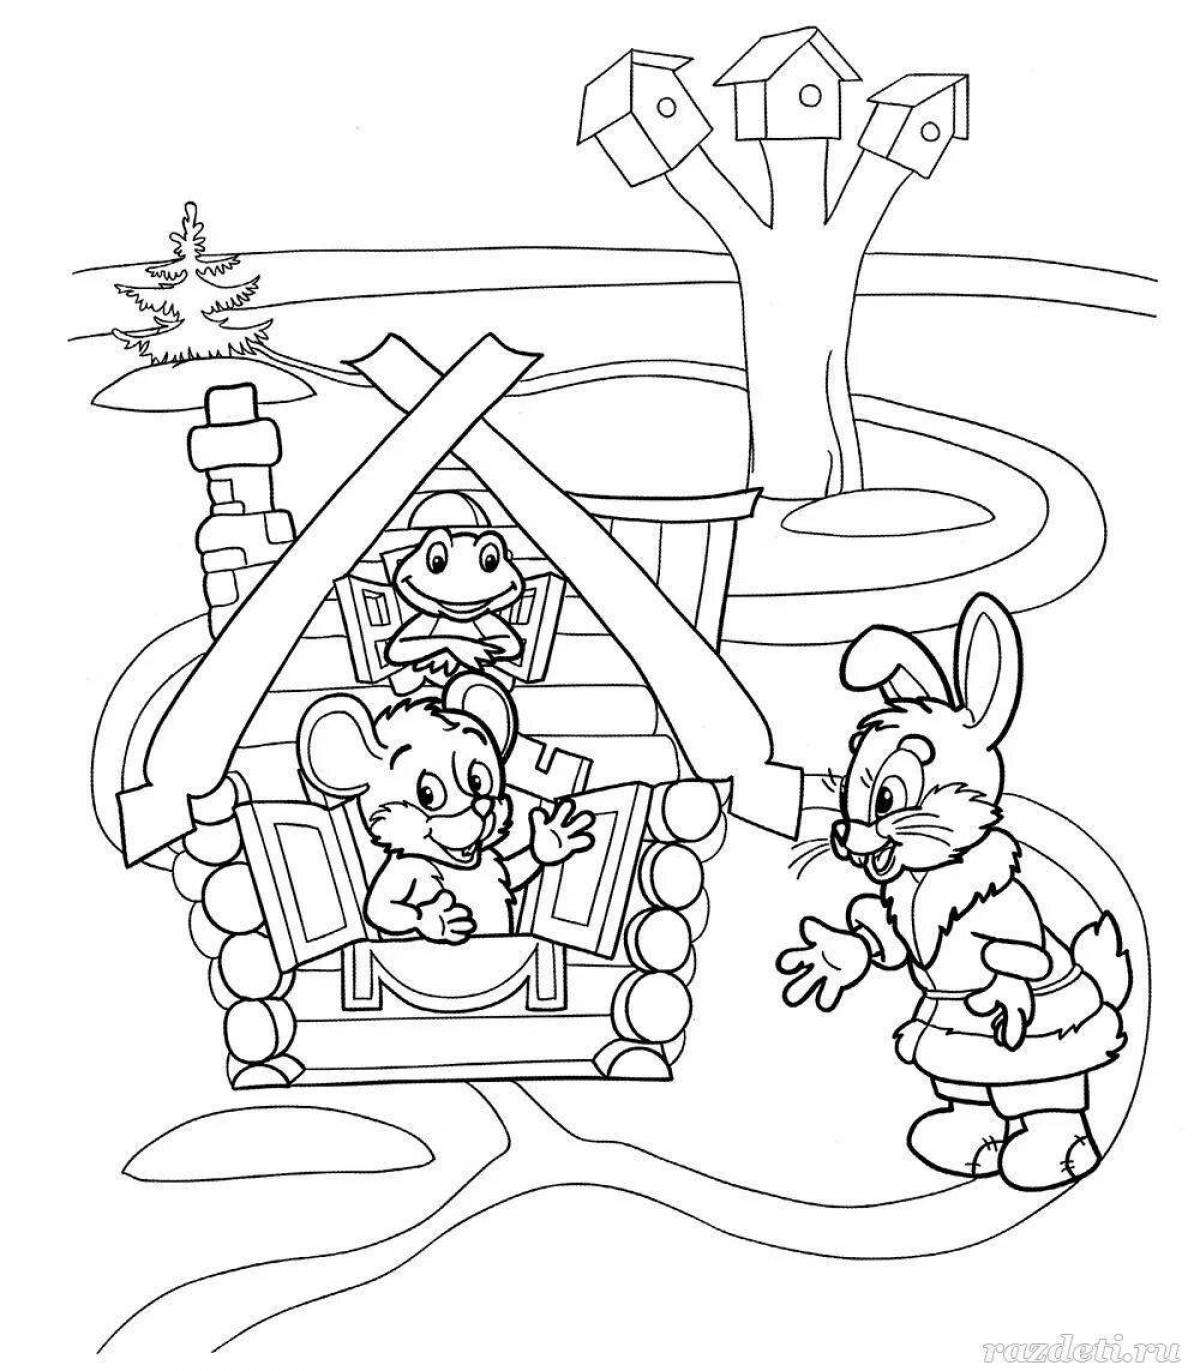 Poetic coloring book visiting a fairy tale 4-5 years old middle group